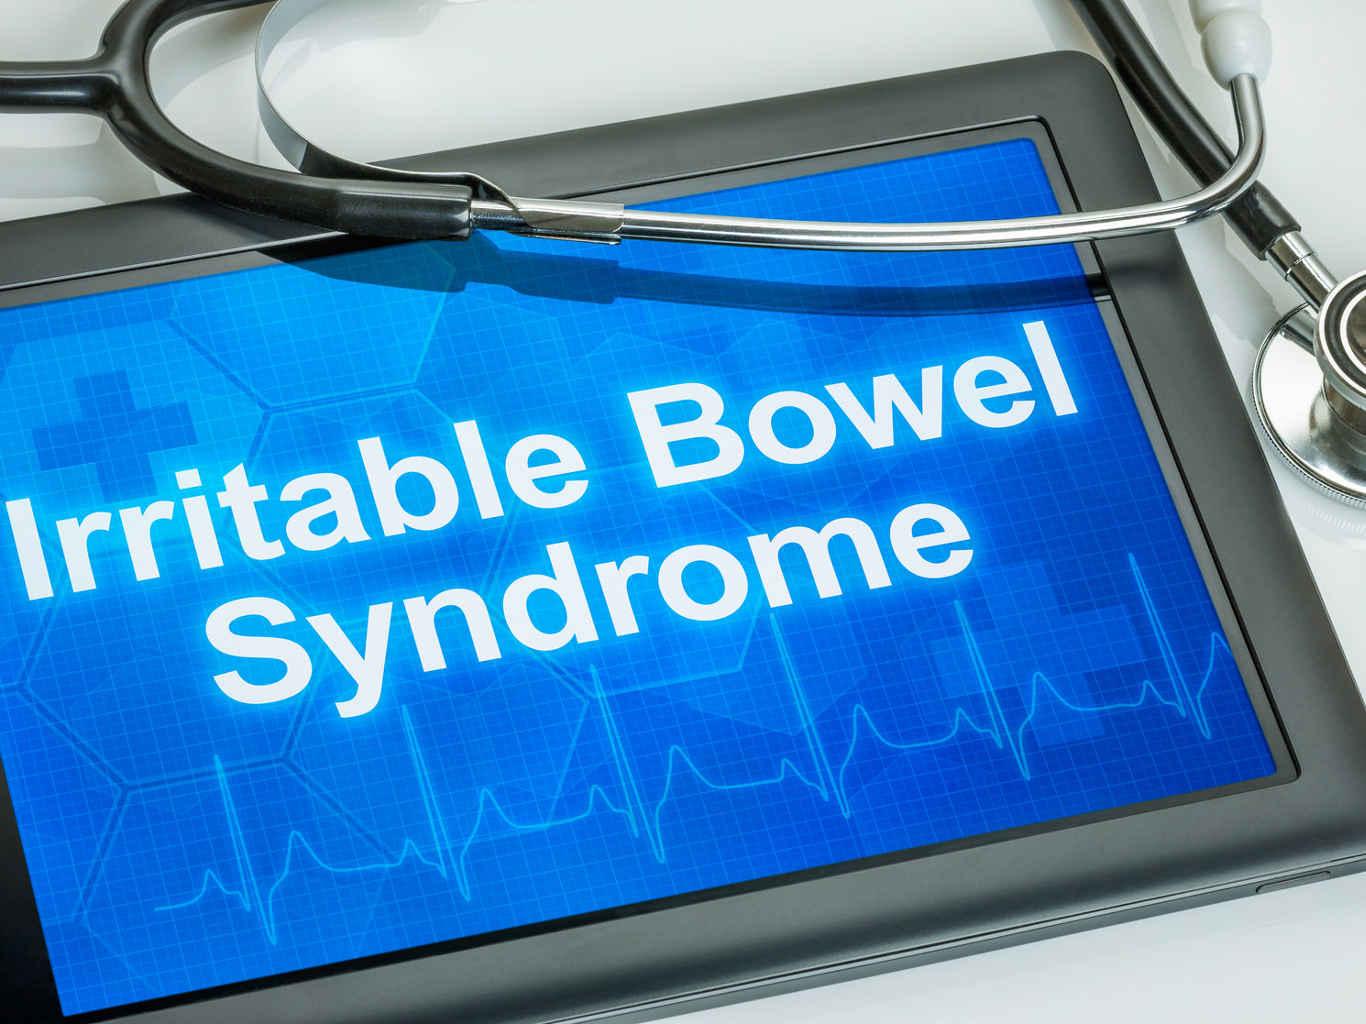 Tablet displaying 'Irritable Bowel Syndrome'.